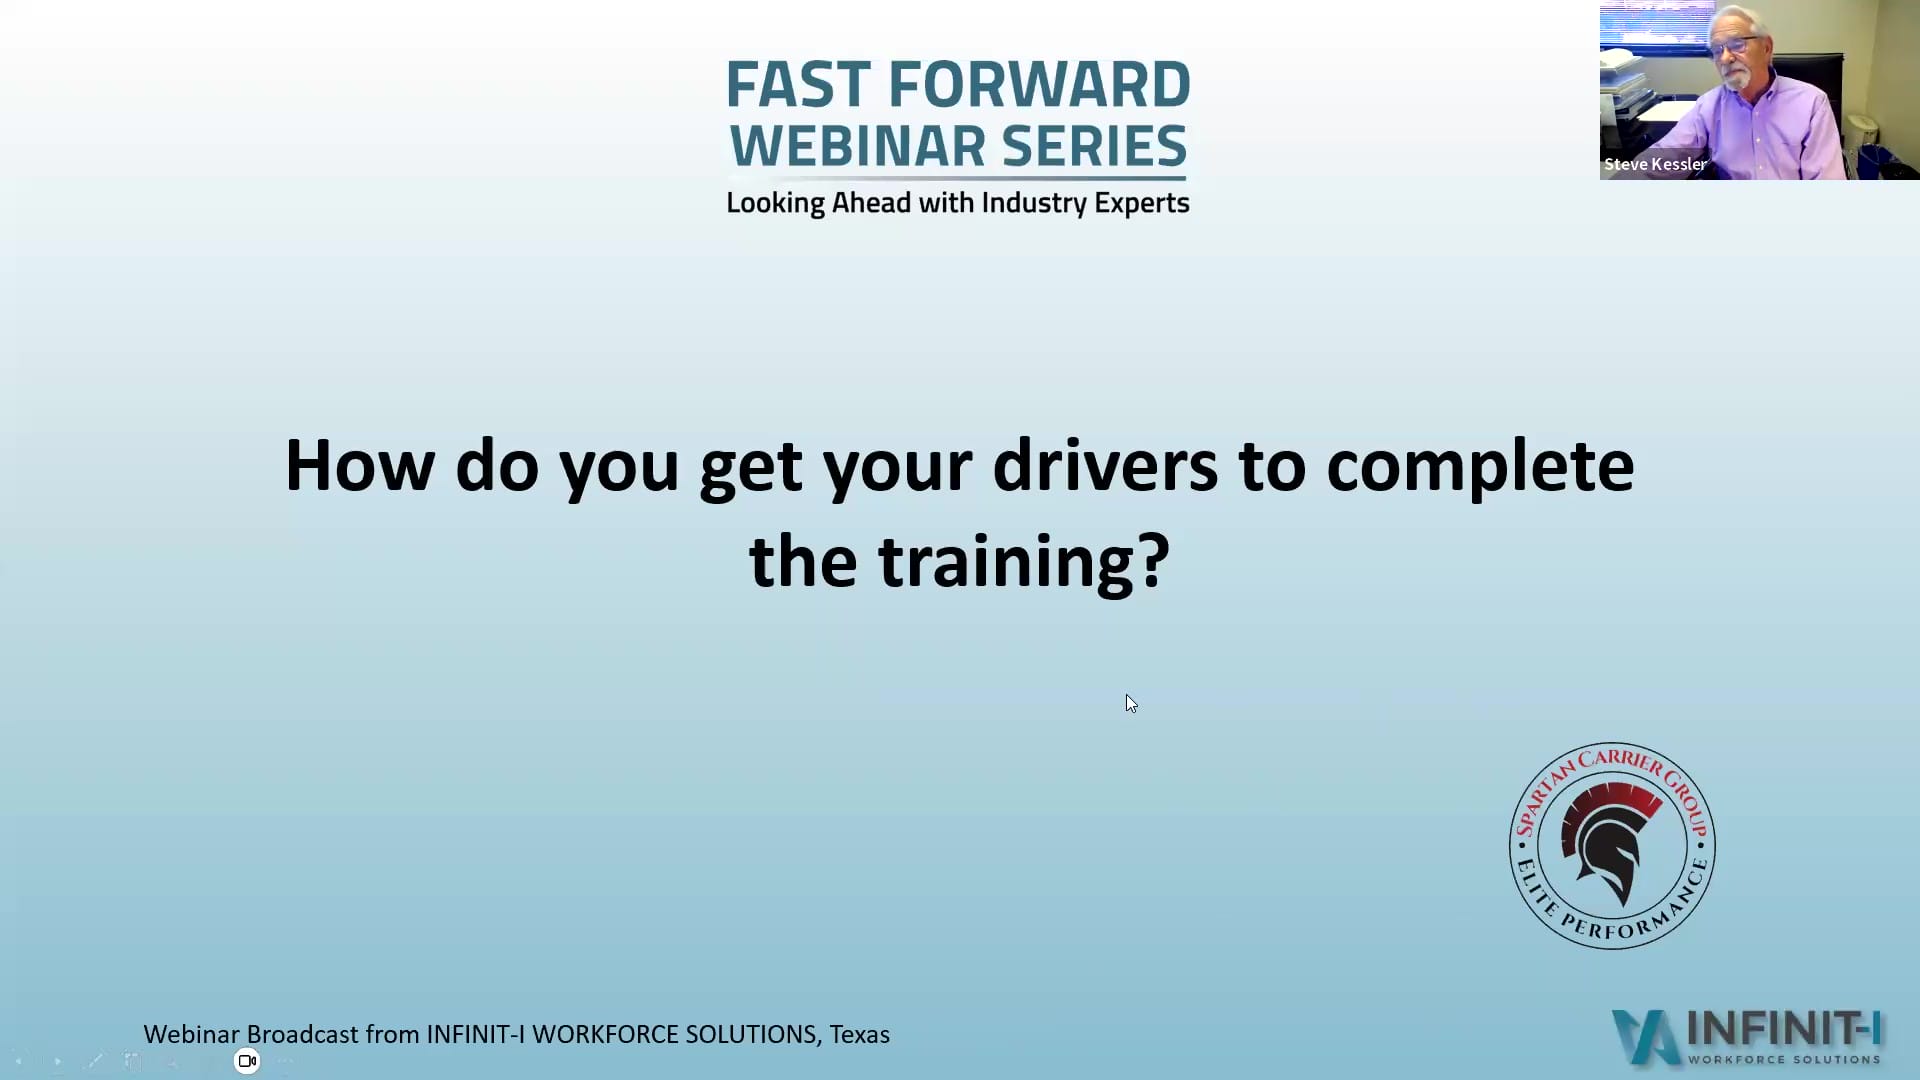 How Do You Get Your Drivers To Complete Training?